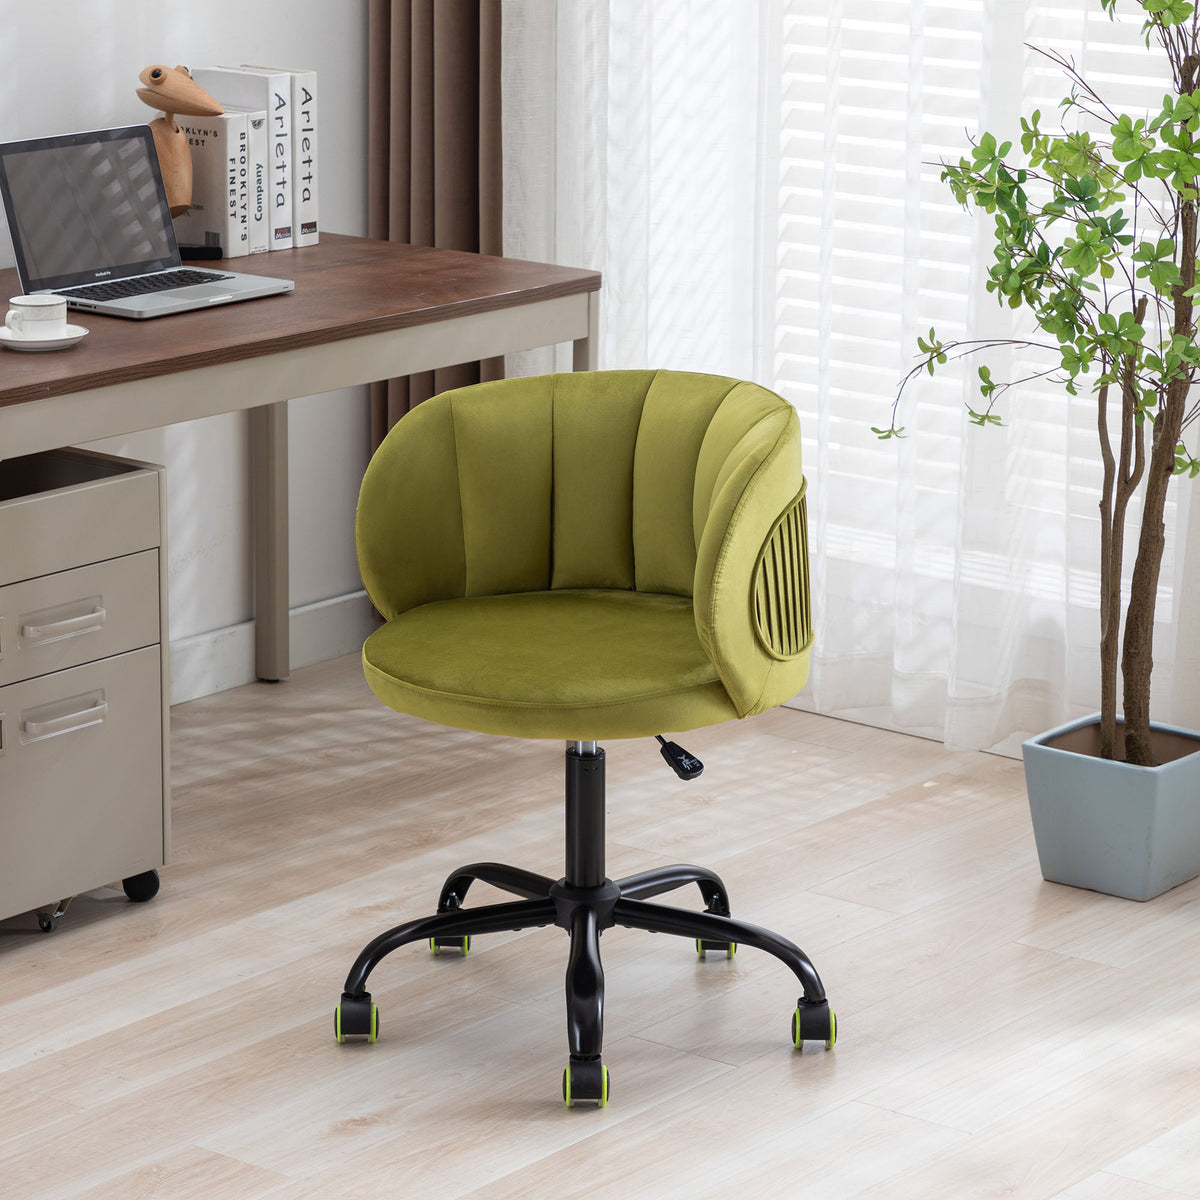 Zen Zone Velvet Leisure Office Chair, can rotate 360 degrees, with pulley - Olive Green